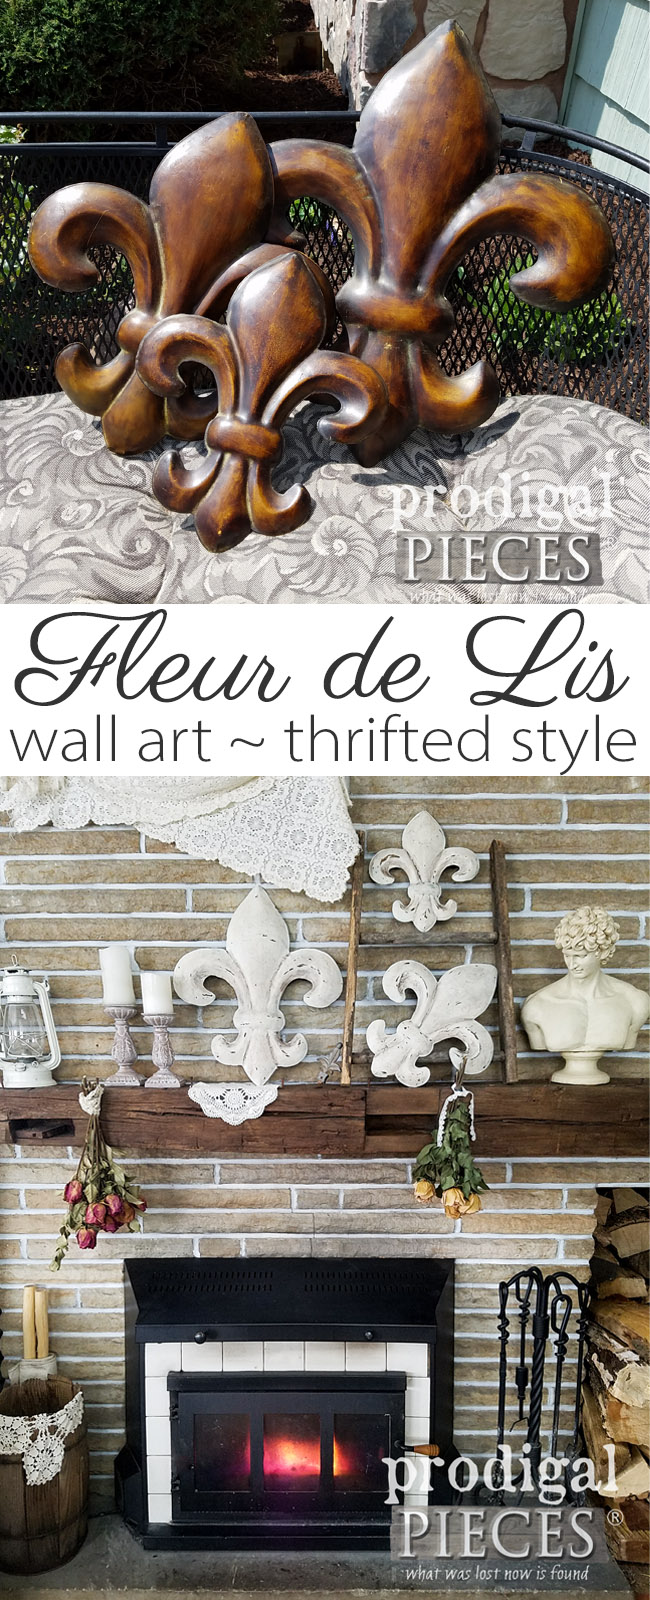 Who knew a thrifted set of Fleur de Lis wall art could look so good?! Get all the DIY details at Prodigal Pieces | prodigalpieces.com